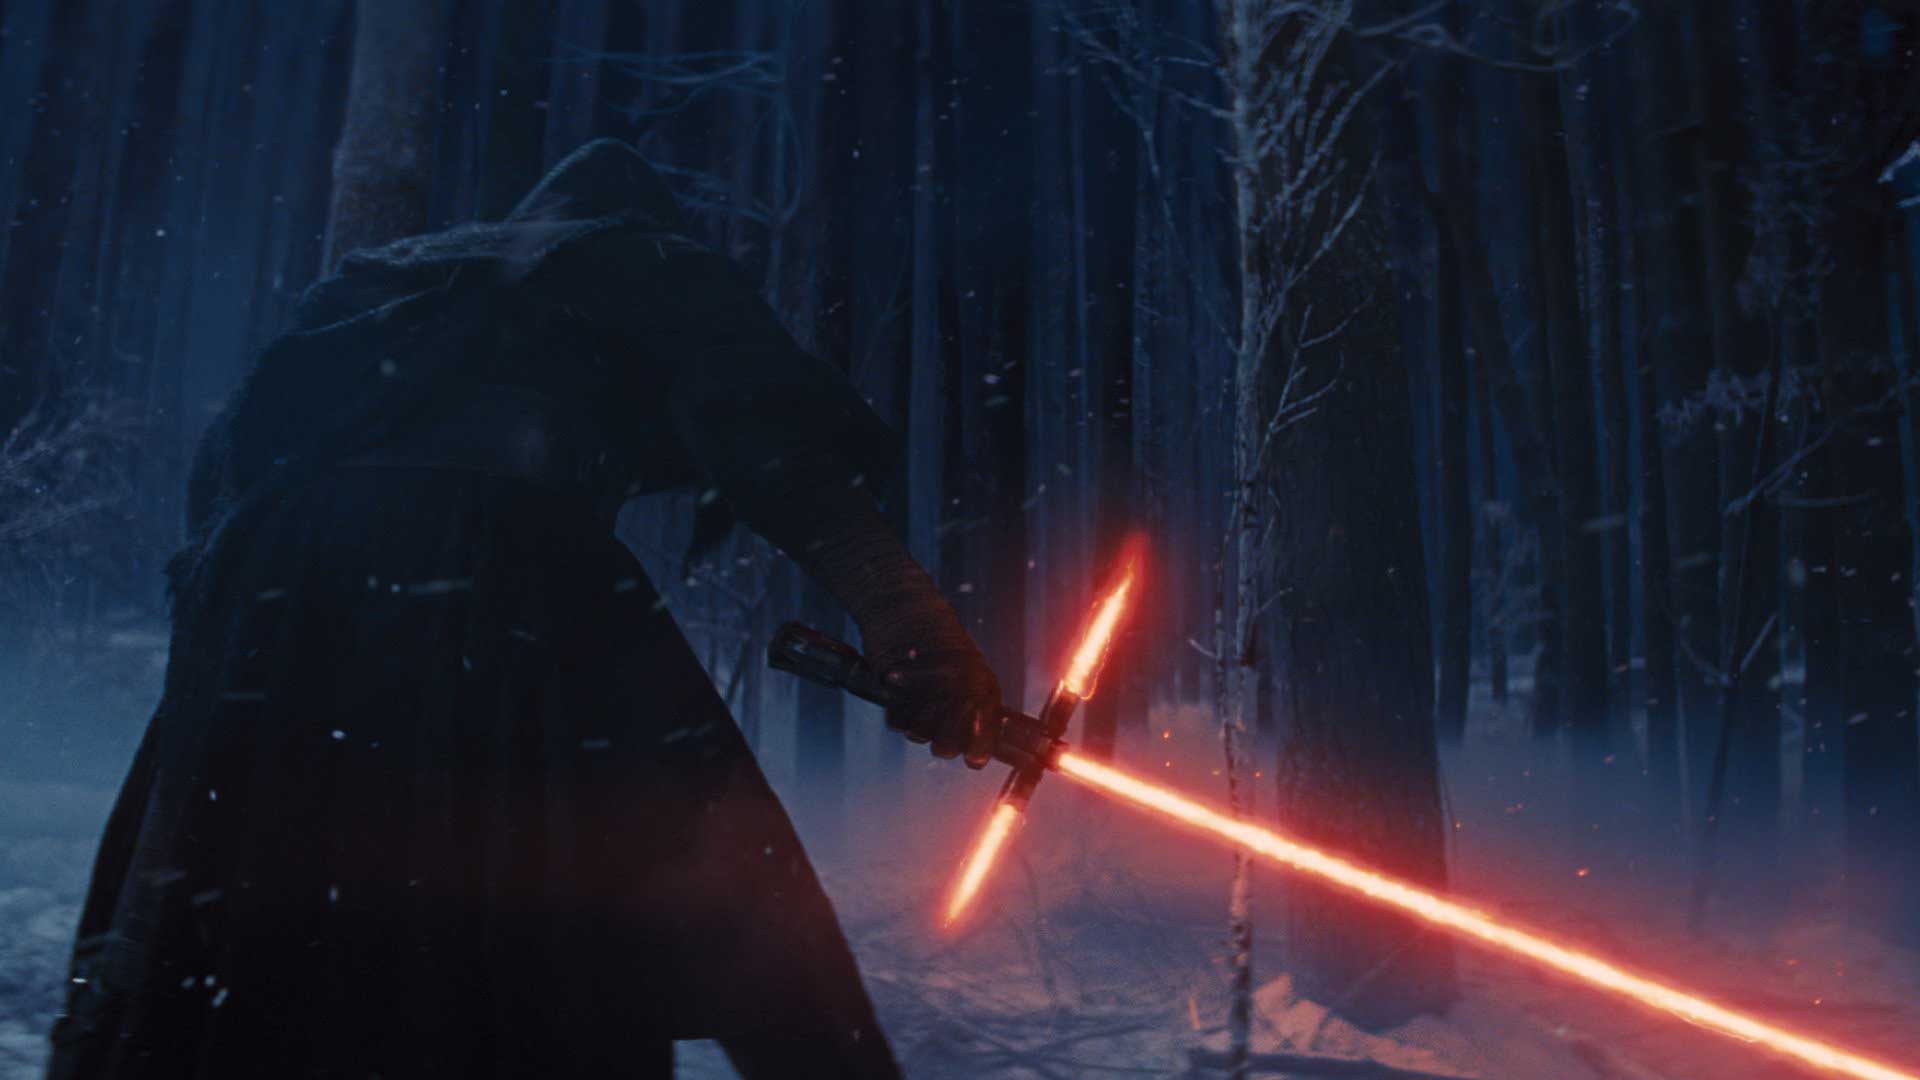 Disney Has Made a “Real” Lightsaber That Extends and Retracts